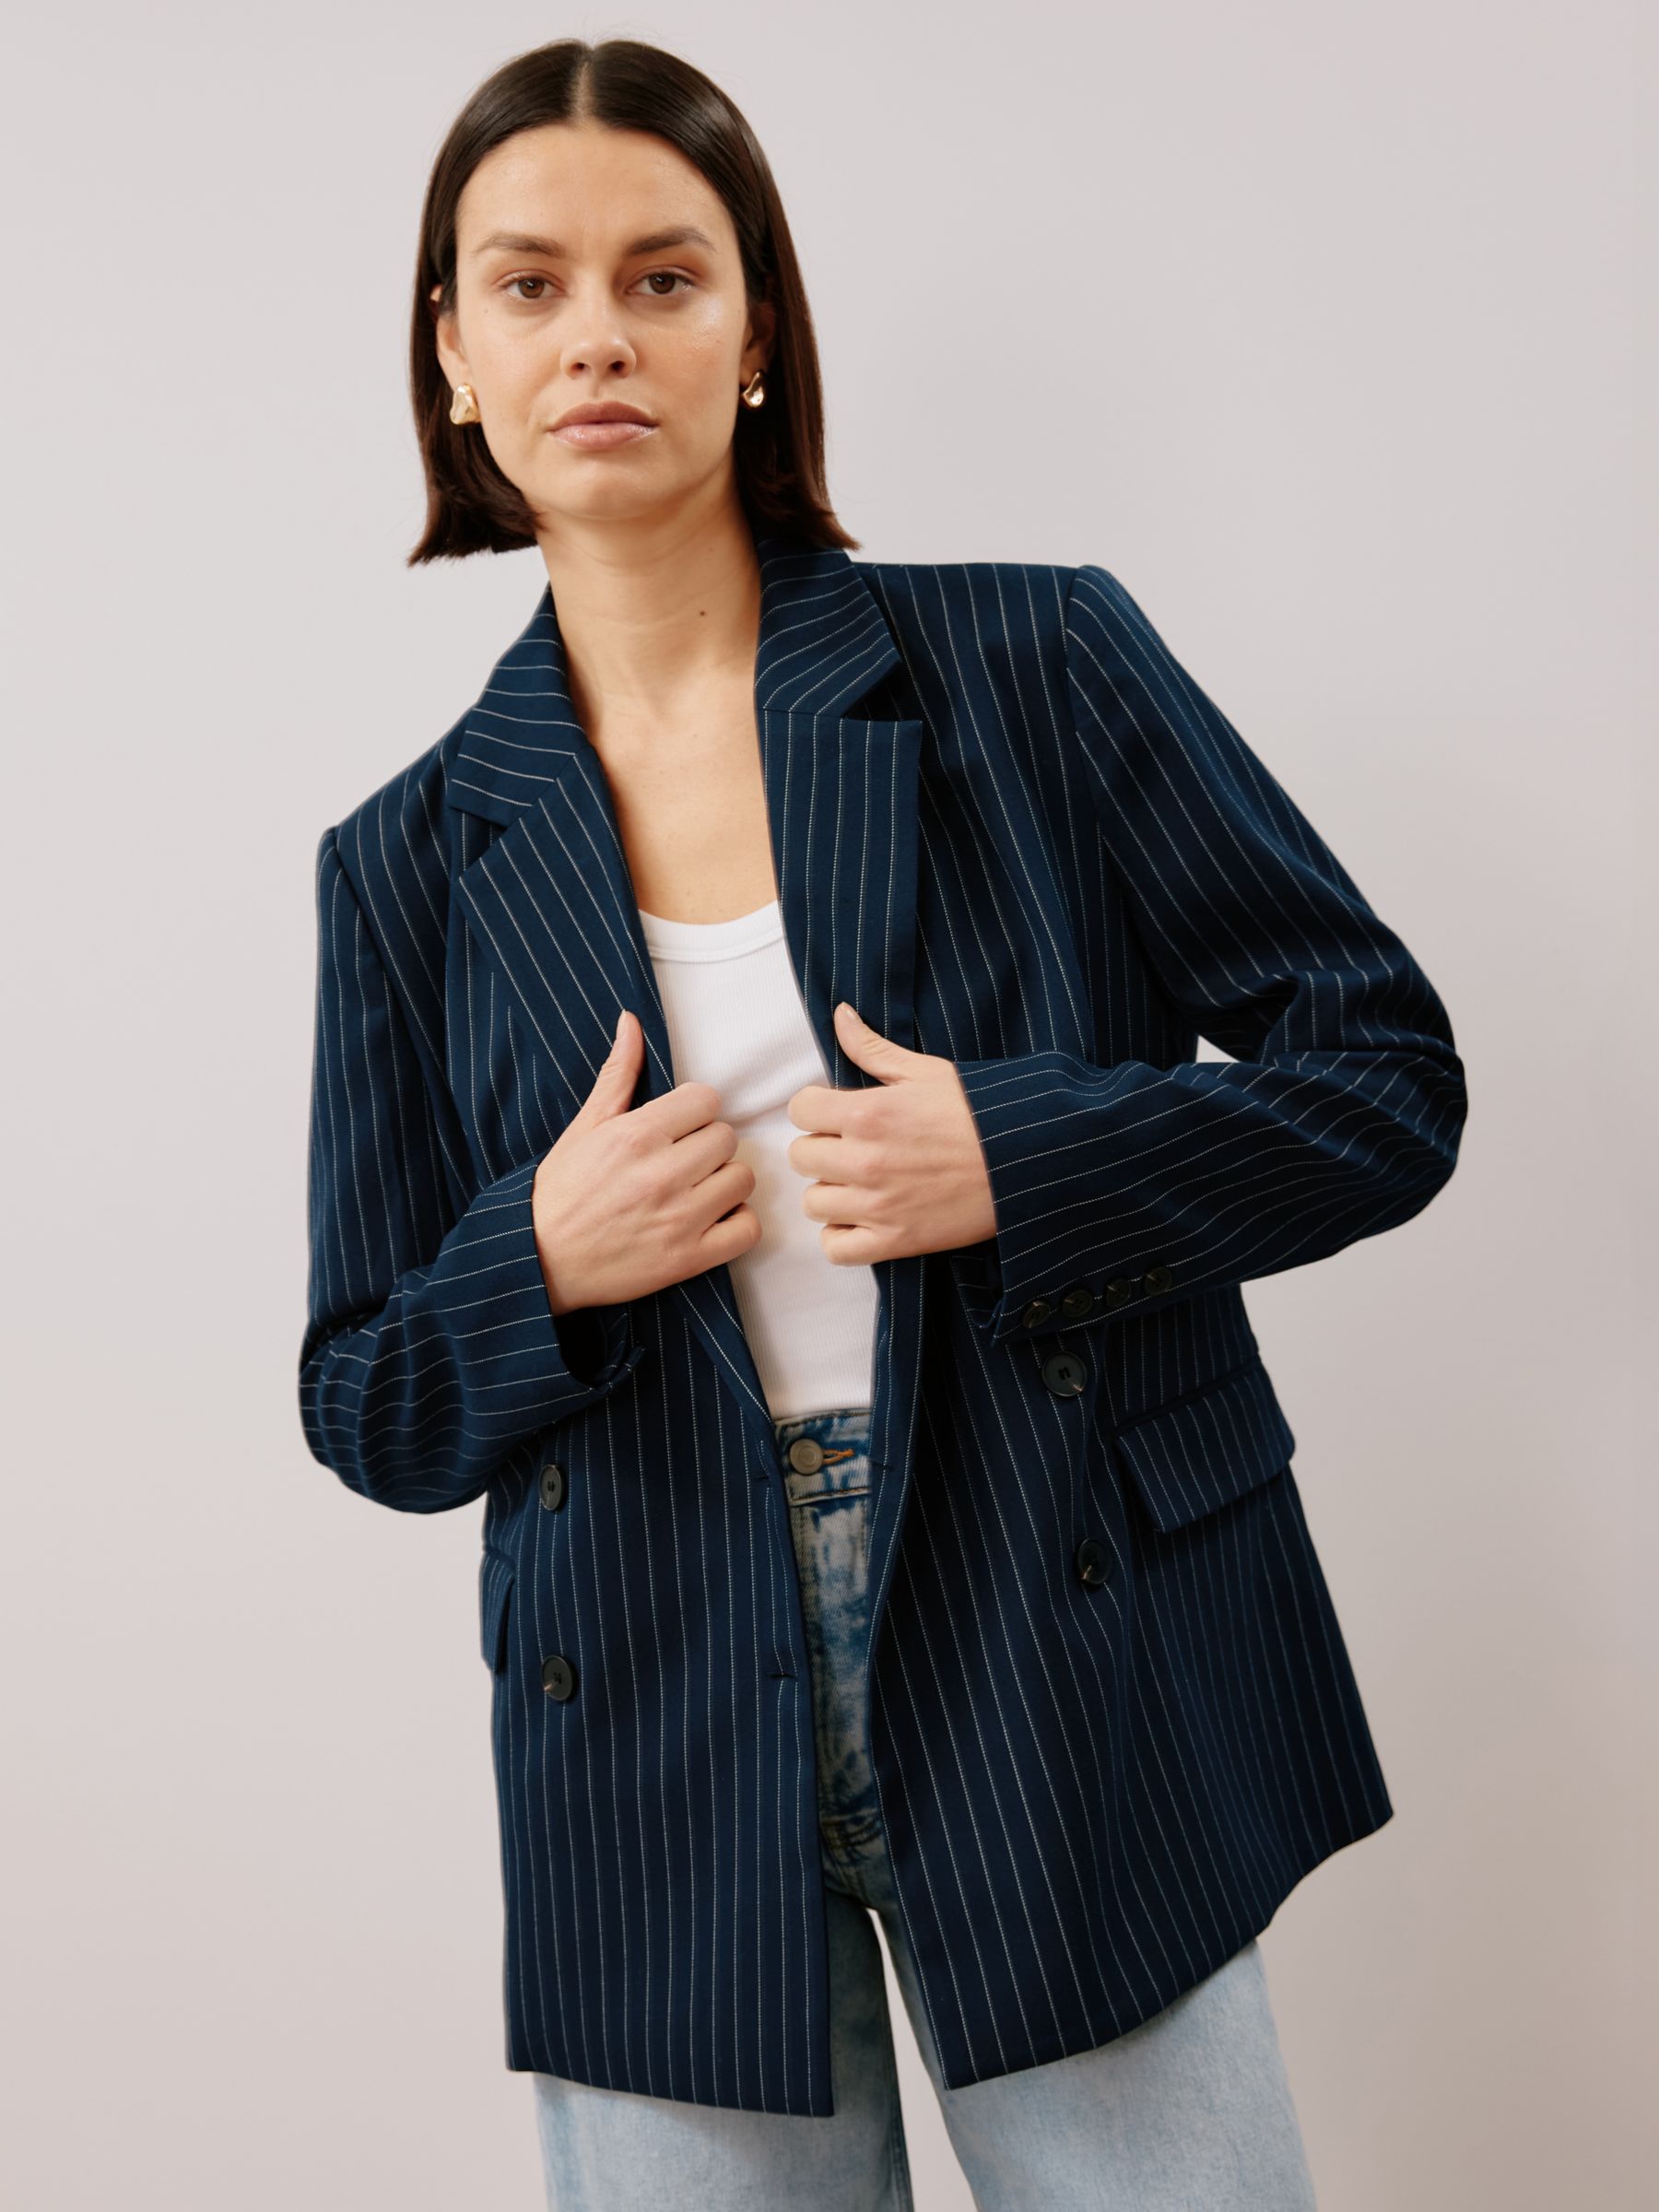 Buy Albaray Relaxed Fit Tailored Pinstripe Blazer, Navy Online at johnlewis.com